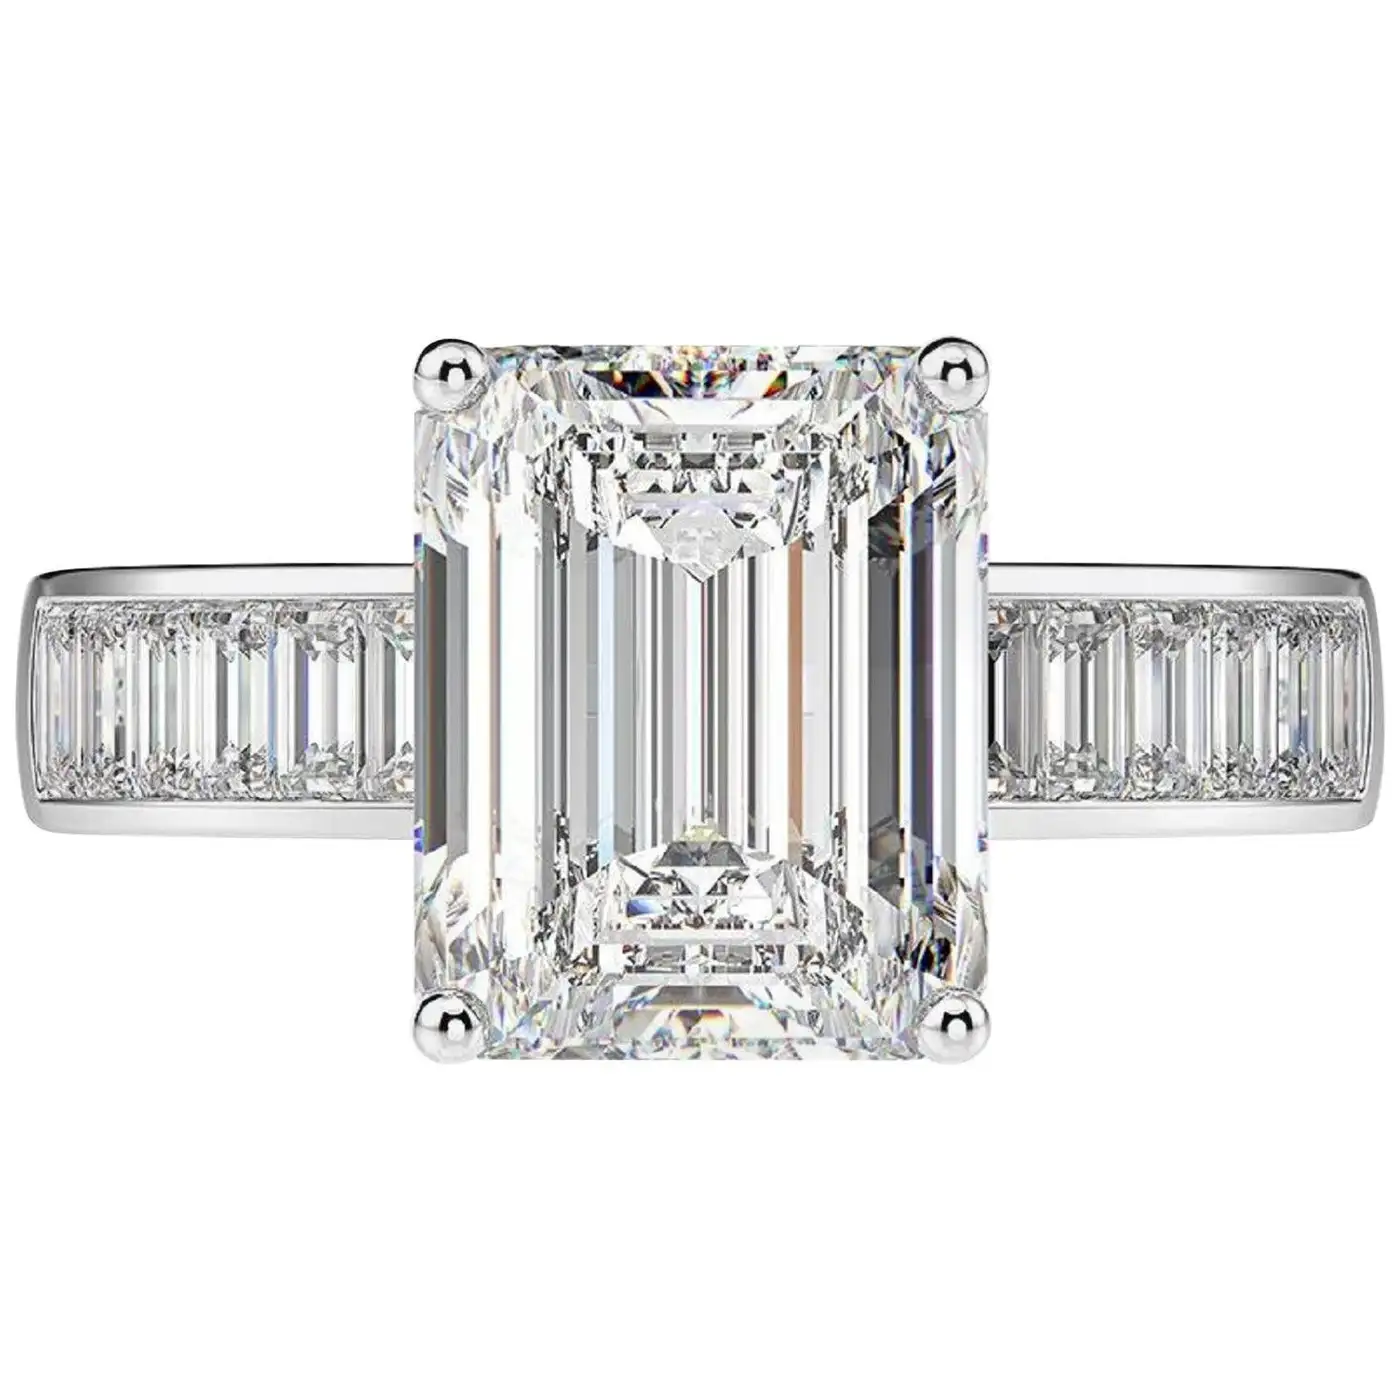 2.25-Carat-Diamond-Engagement-Ring-with-Side-Emerald-Cut-Diamonds-GIA-Certified-1.webp